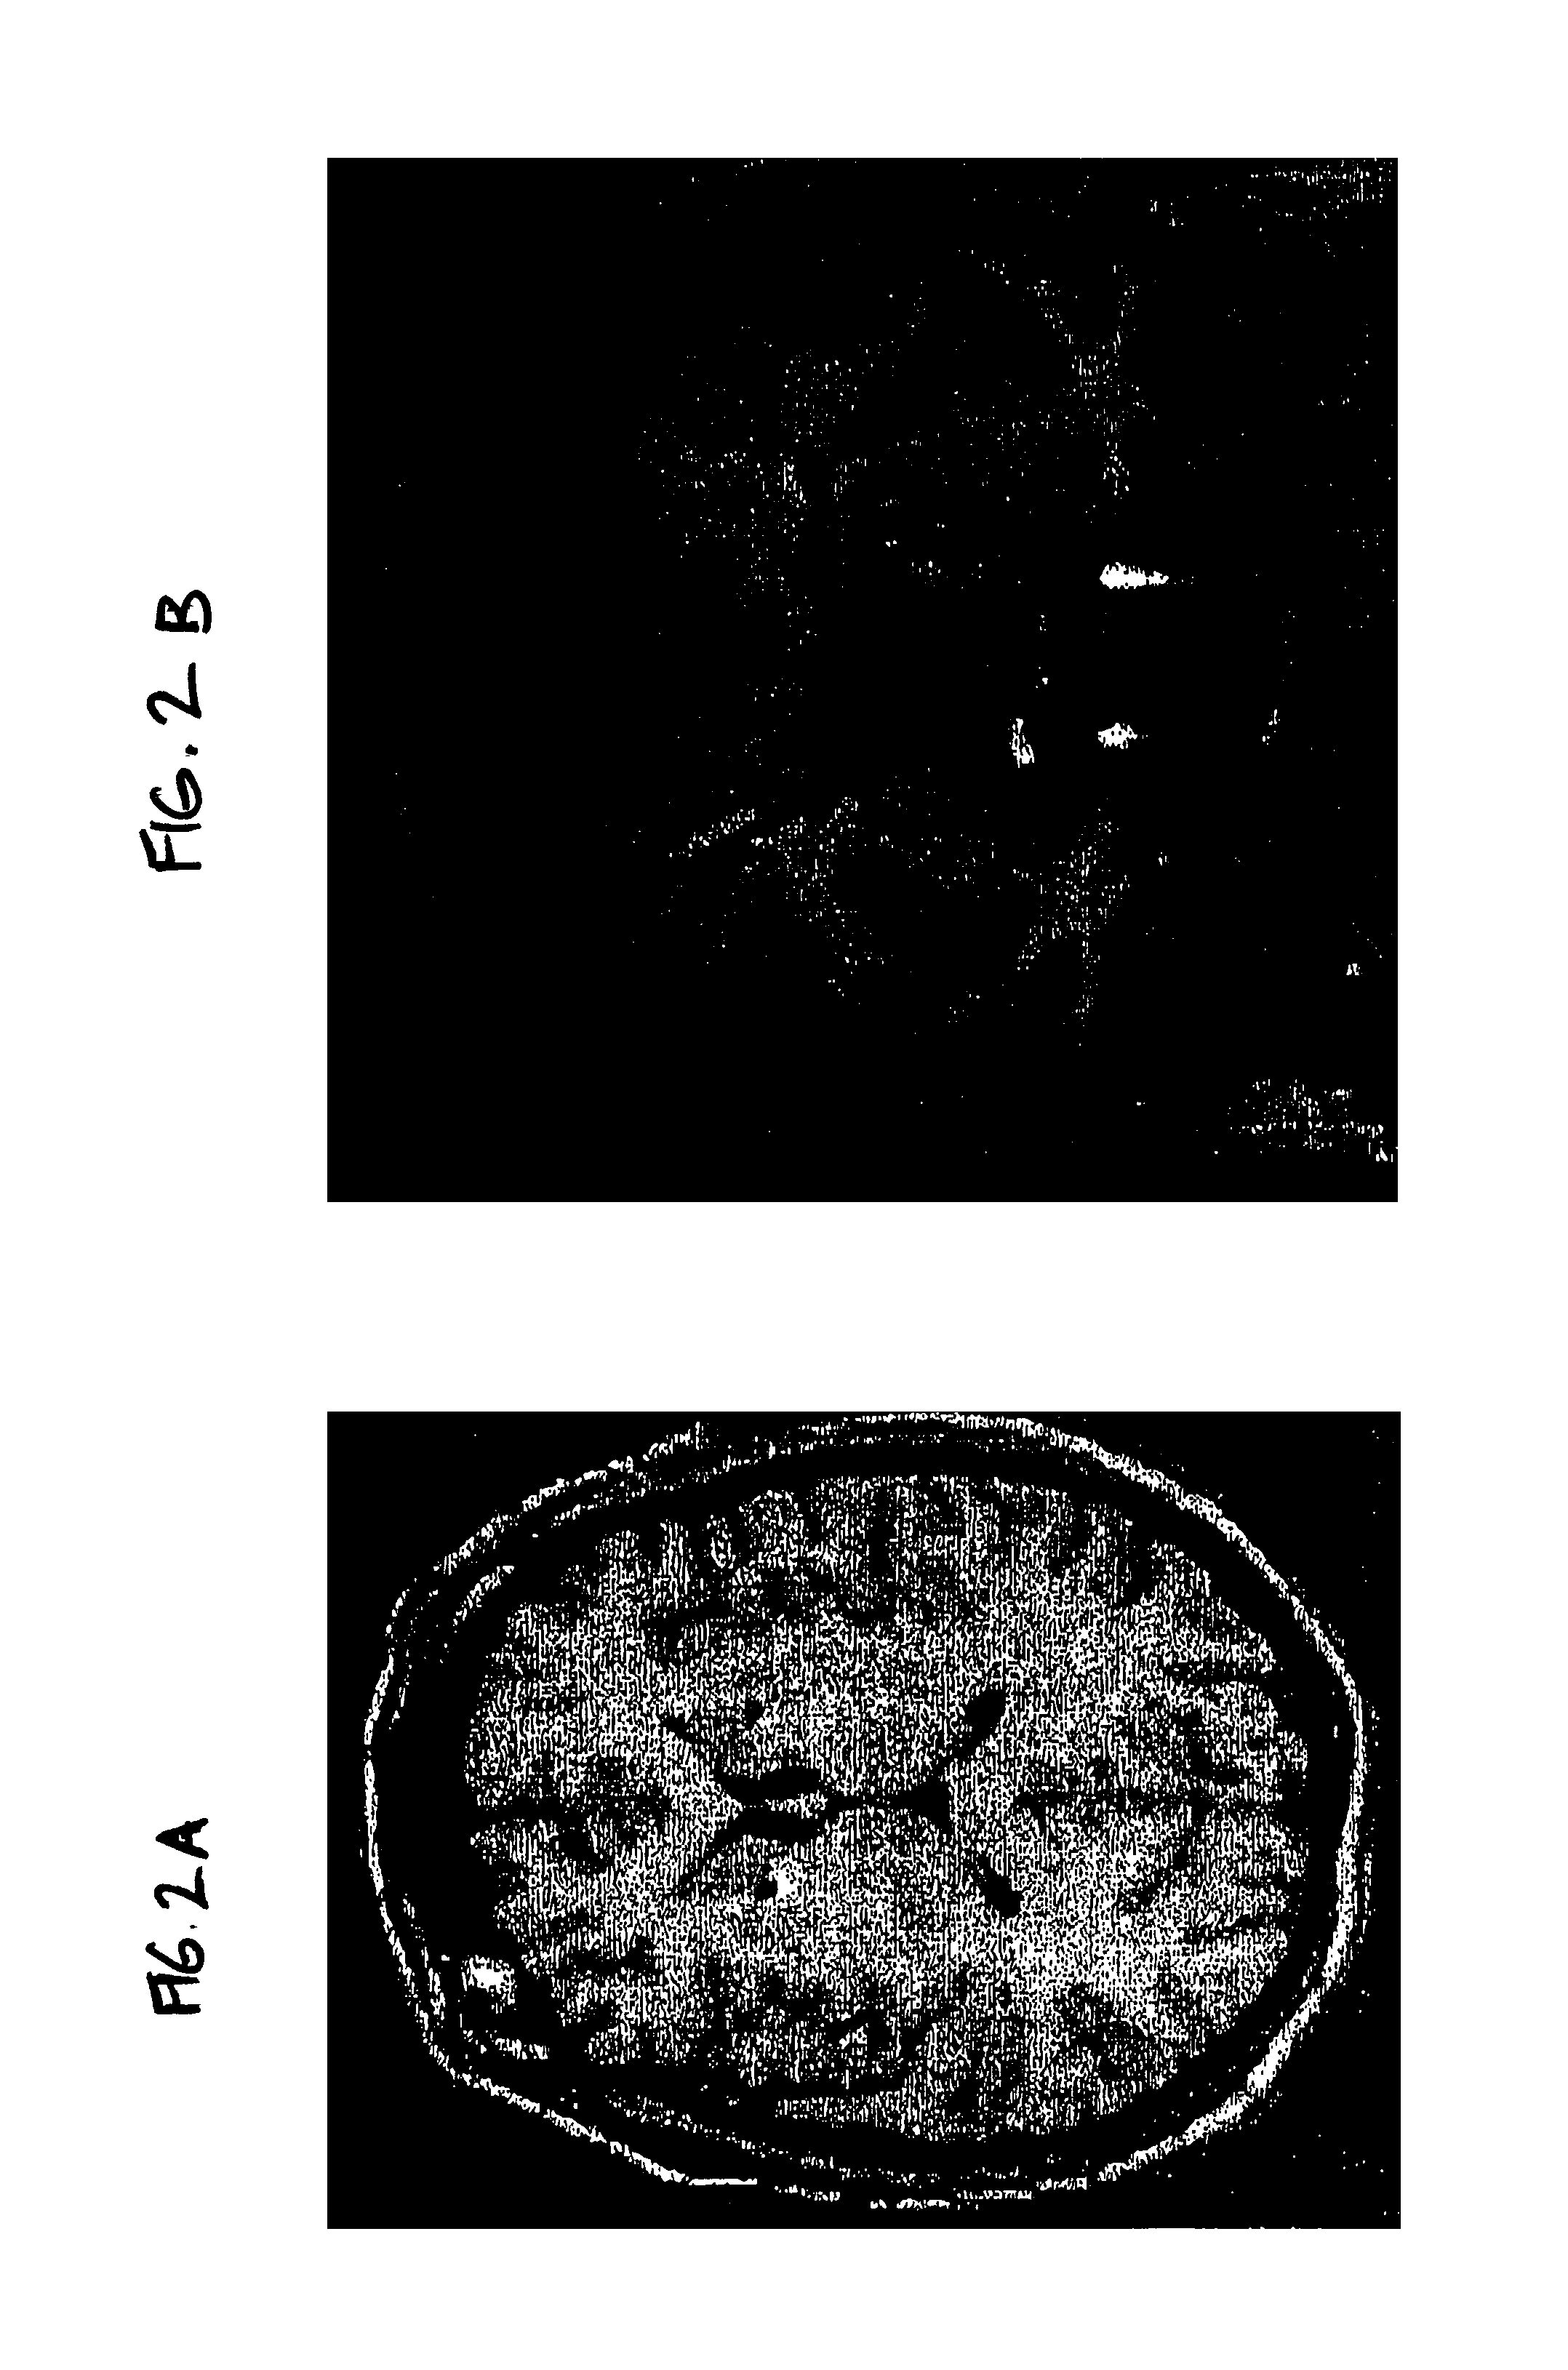 Method for treating obsessive-compulsive disorder with electrical stimulation of the brain internal capsule